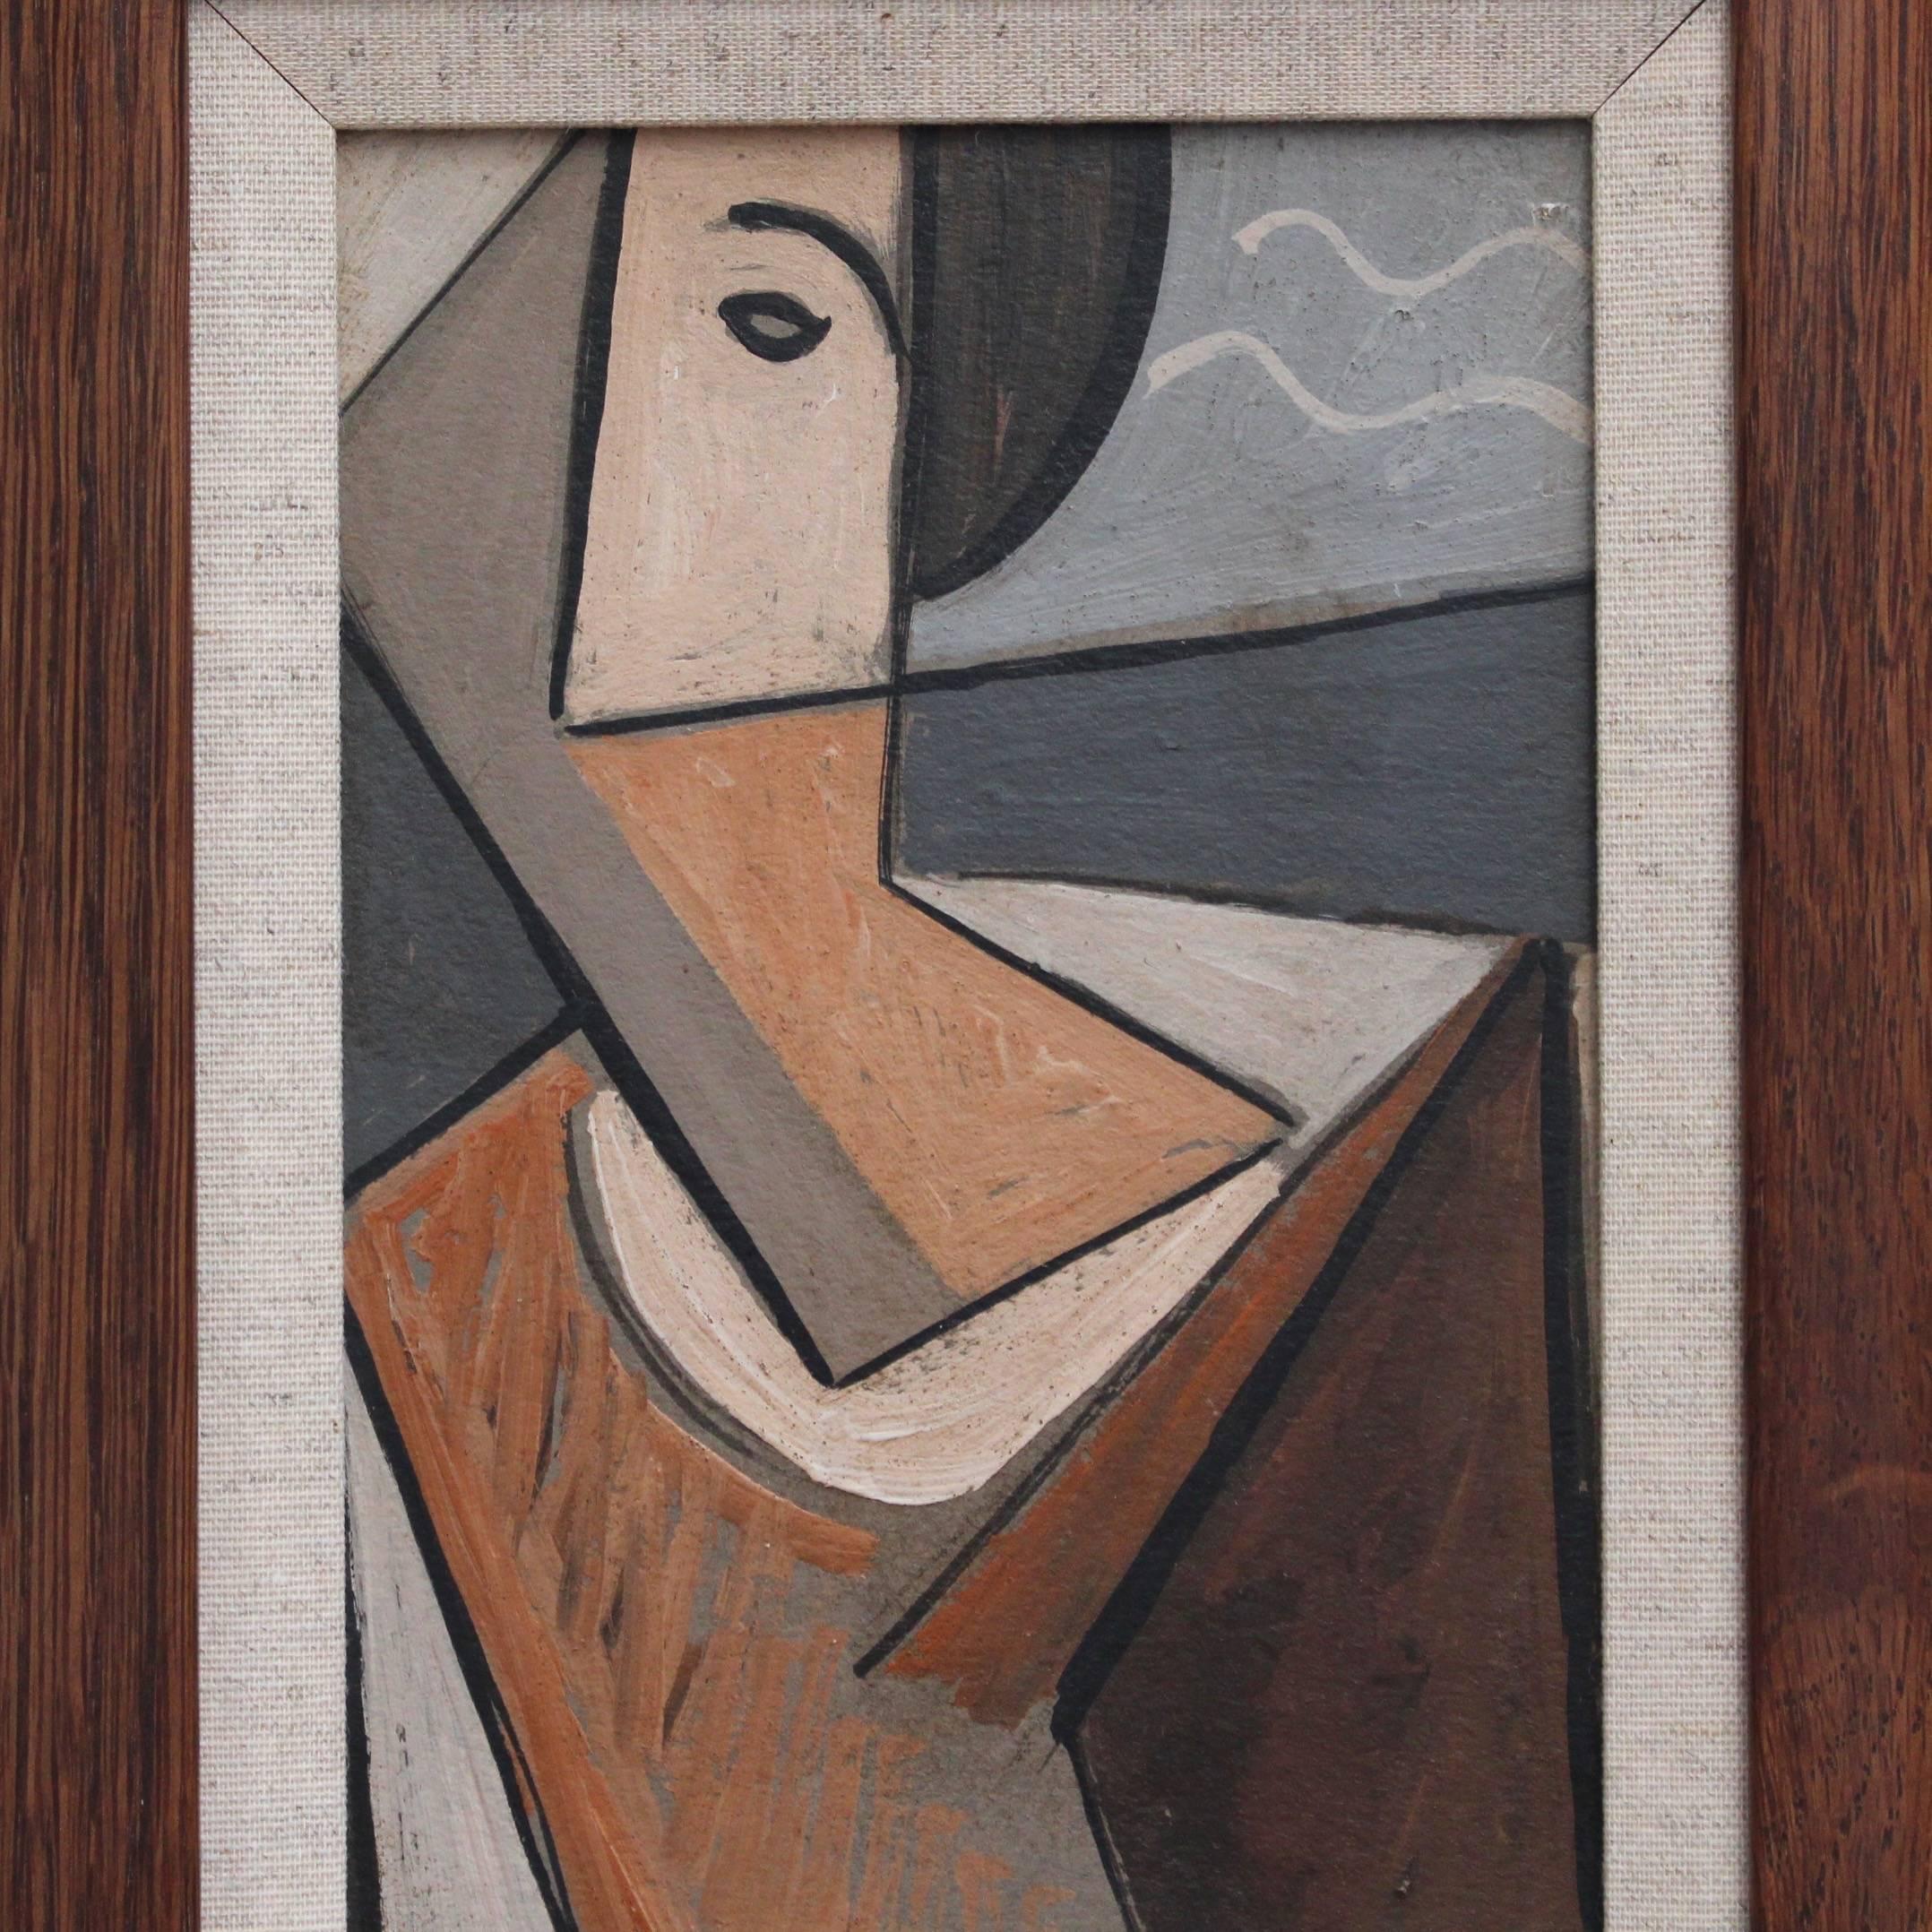 'Portrait of a Young Man' by VR, Mid-Century Modern Cubist Oil Painting, Berlin 2